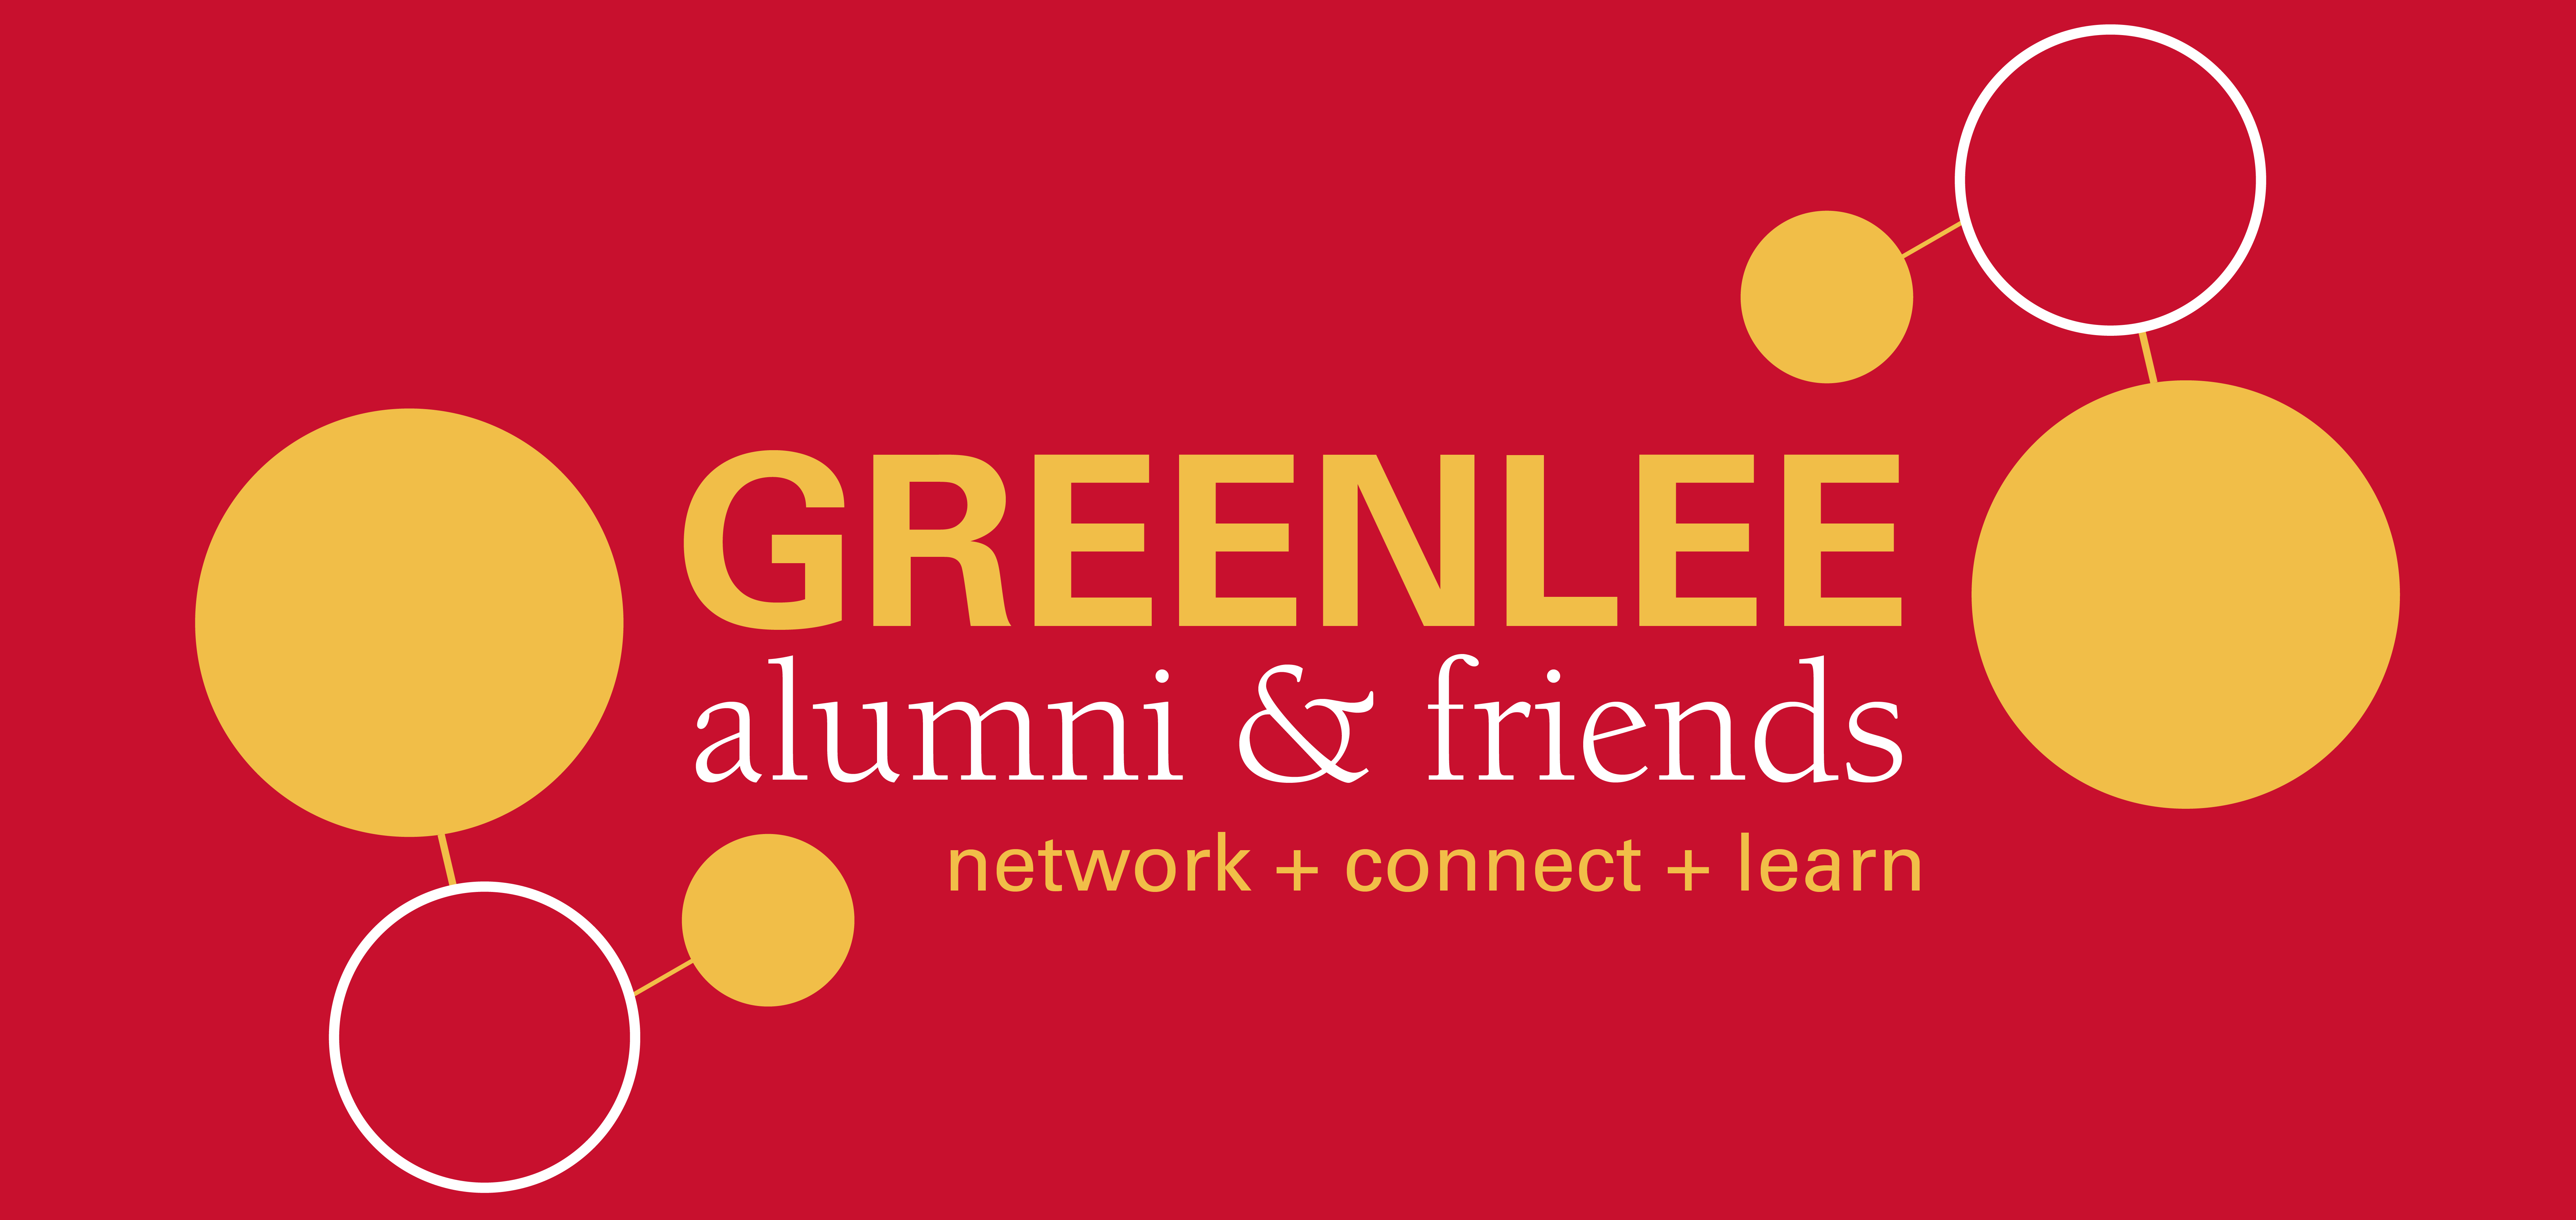 Greenlee Alumni and Friends graphic